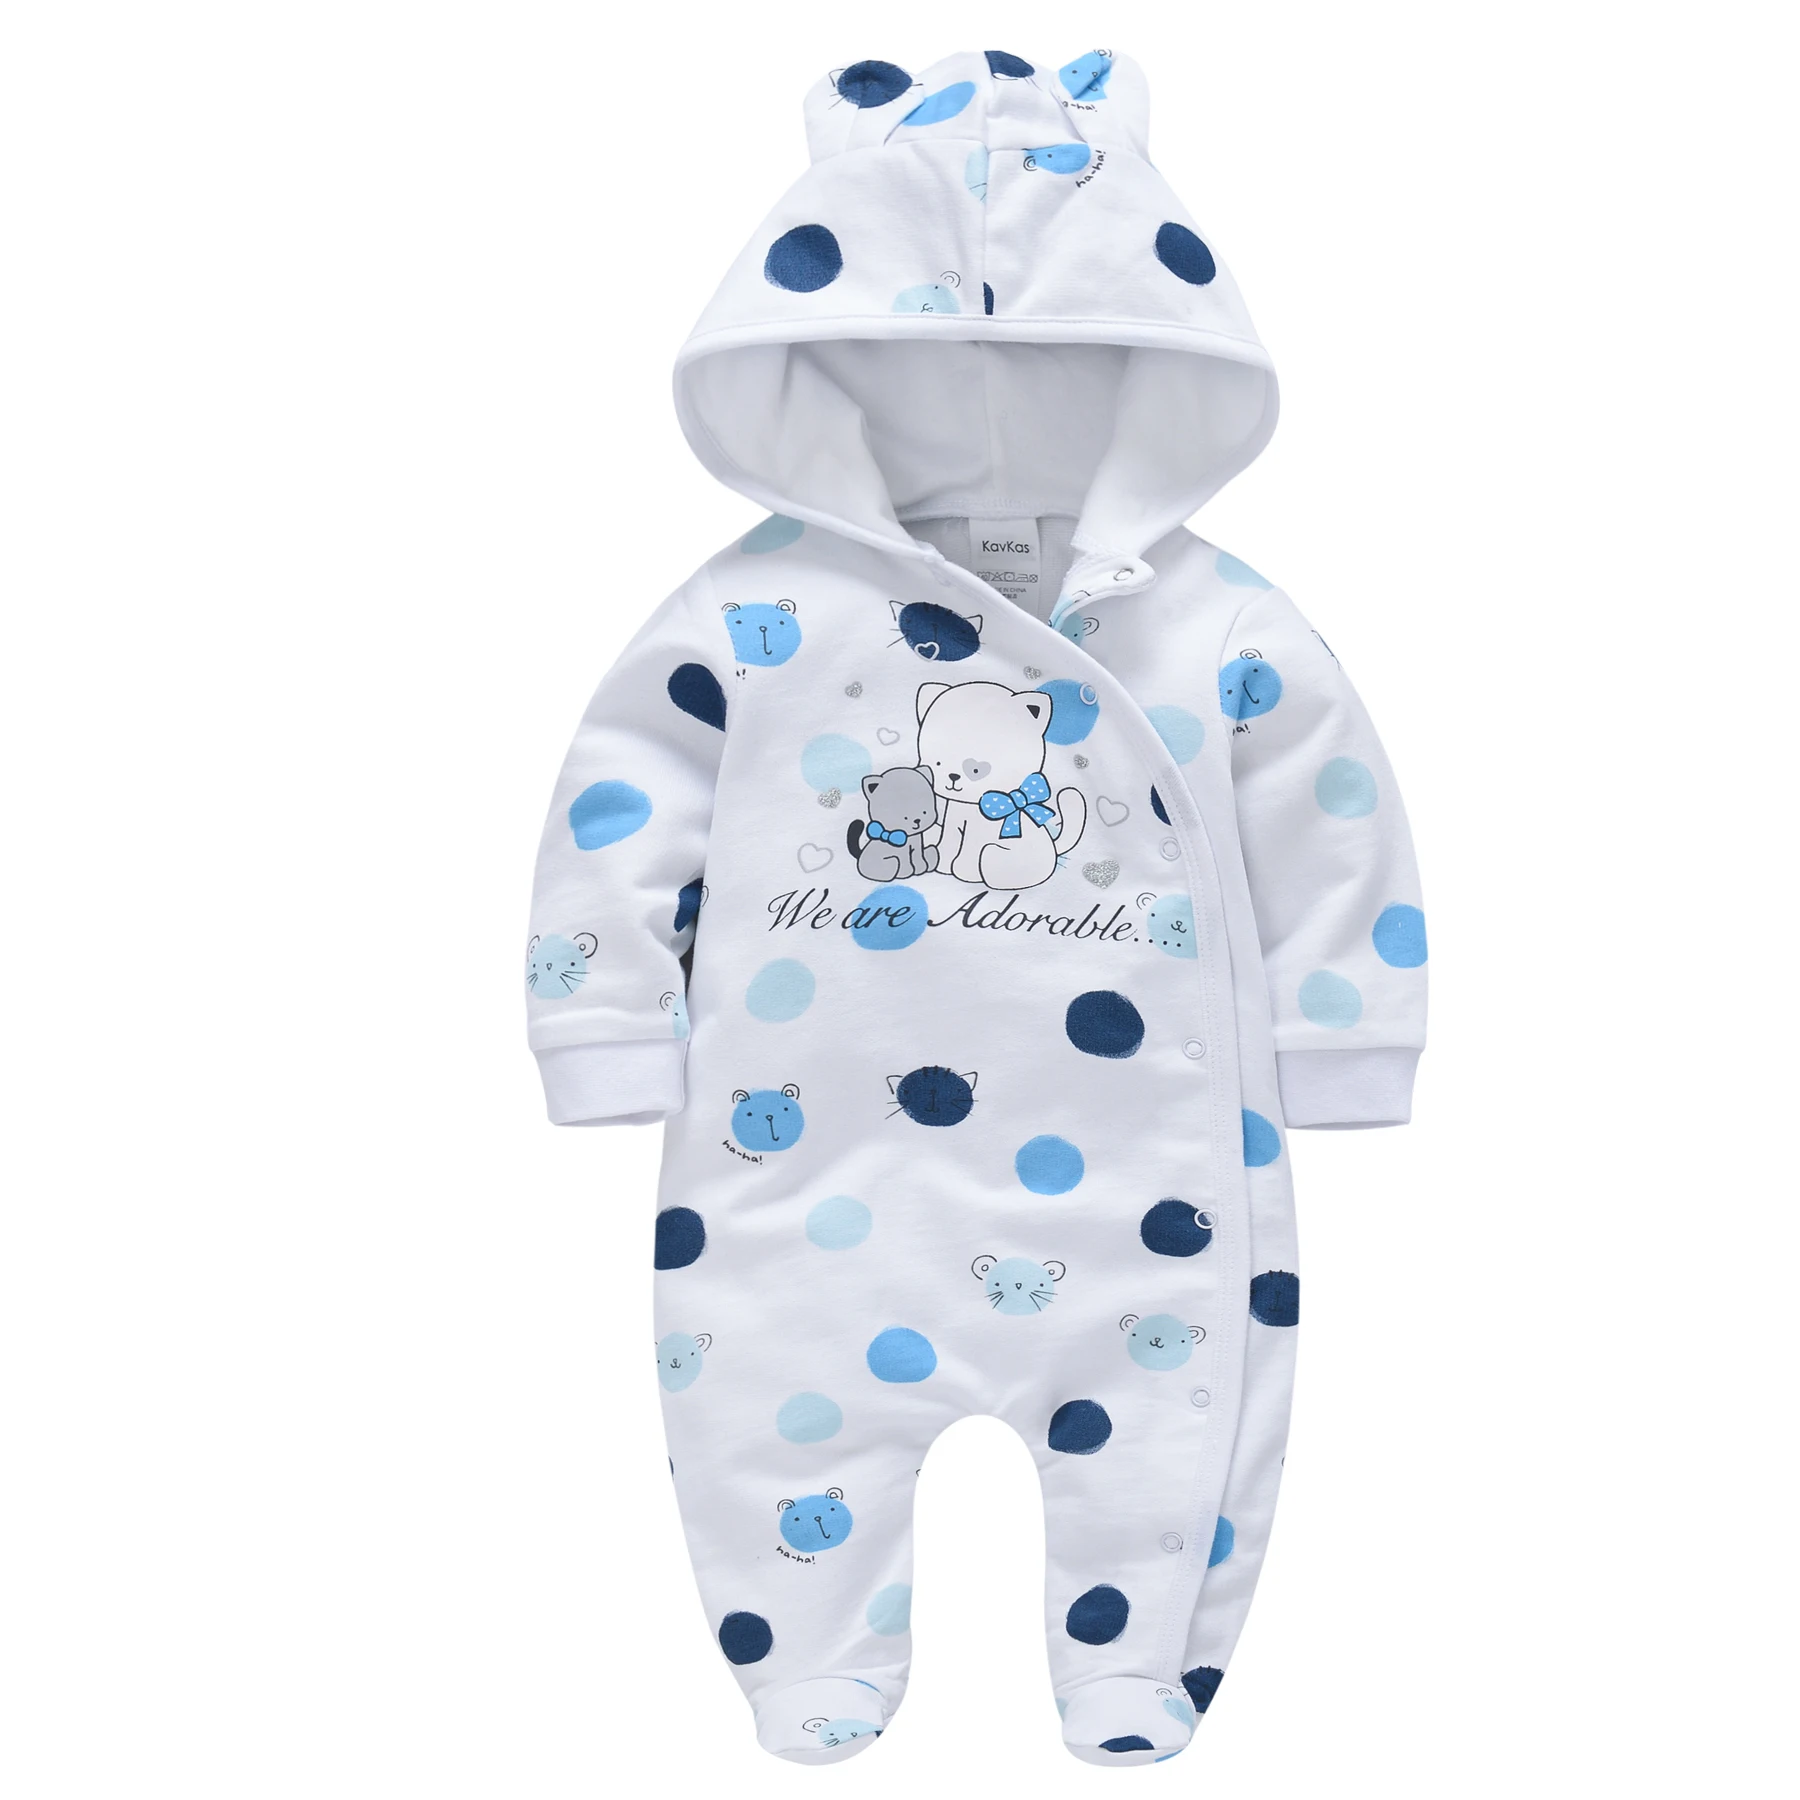 

Spring Autumn New Baby Boys Romper Cotton Hooded Onesies Toddler Baby Girls Clothes Newborn Baby Jumpsuit Infant Boy Coveralls